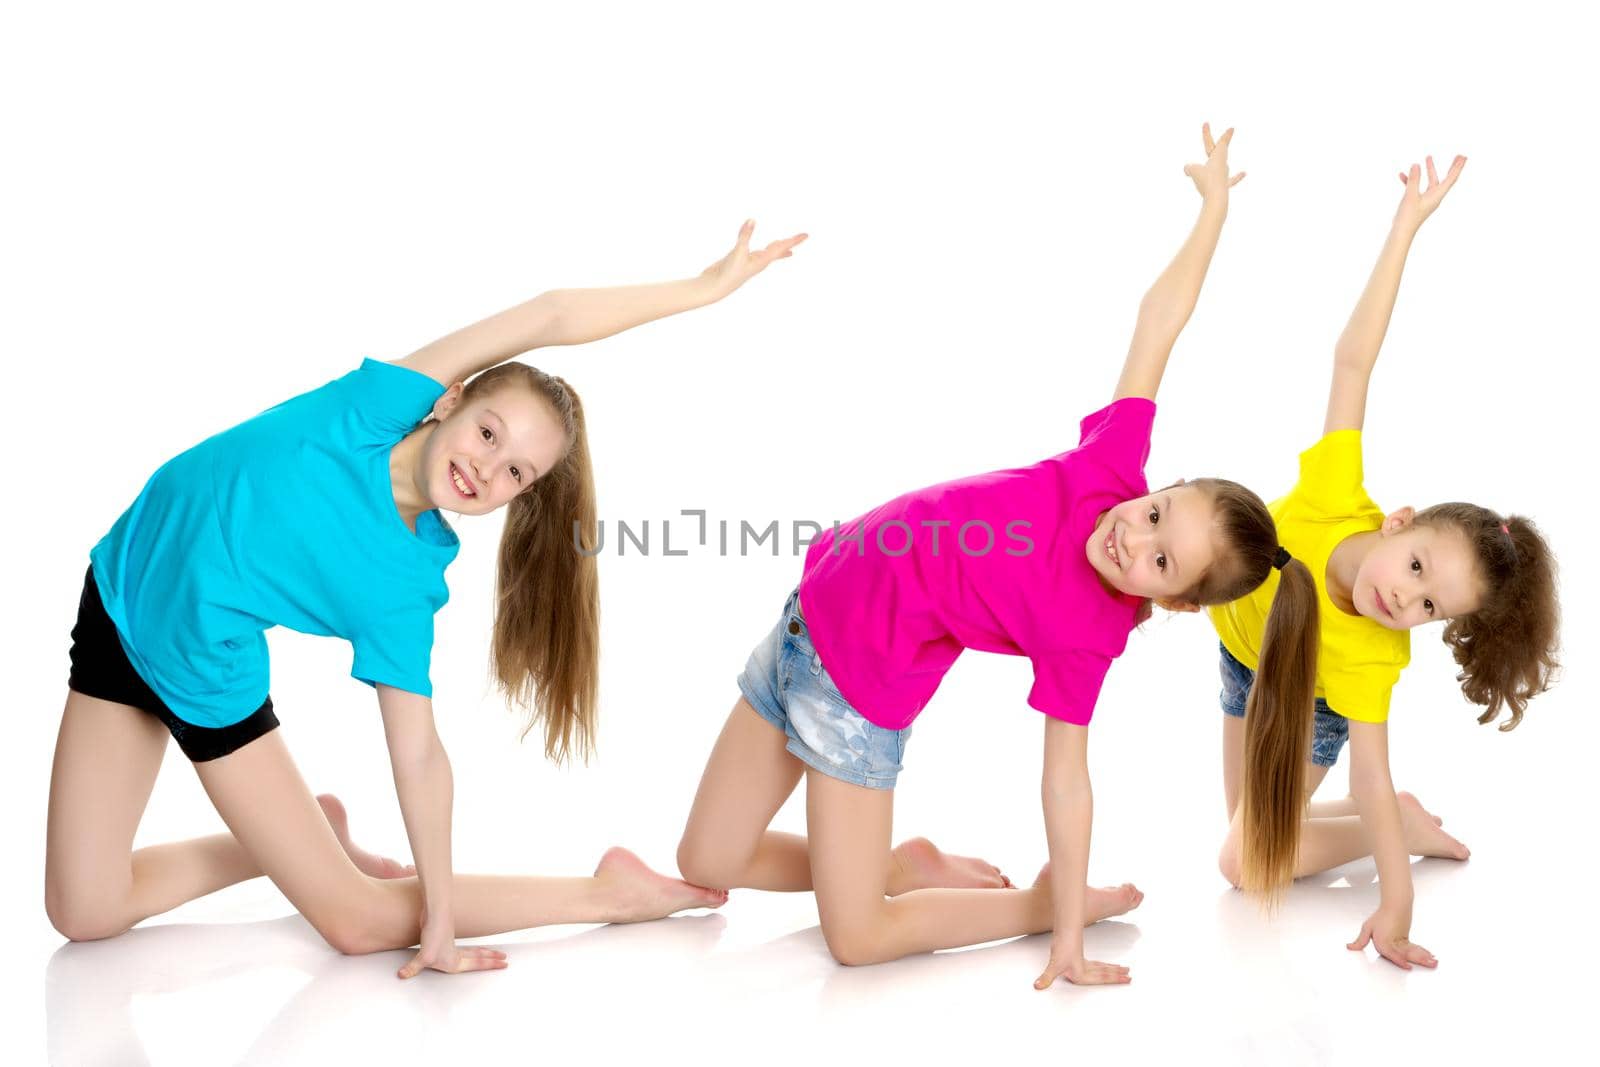 A group of cheerful little girls-gymnasts performing various gymnastic and fitness exercises. The concept of an active way of life, a happy childhood. Isolated on white background.